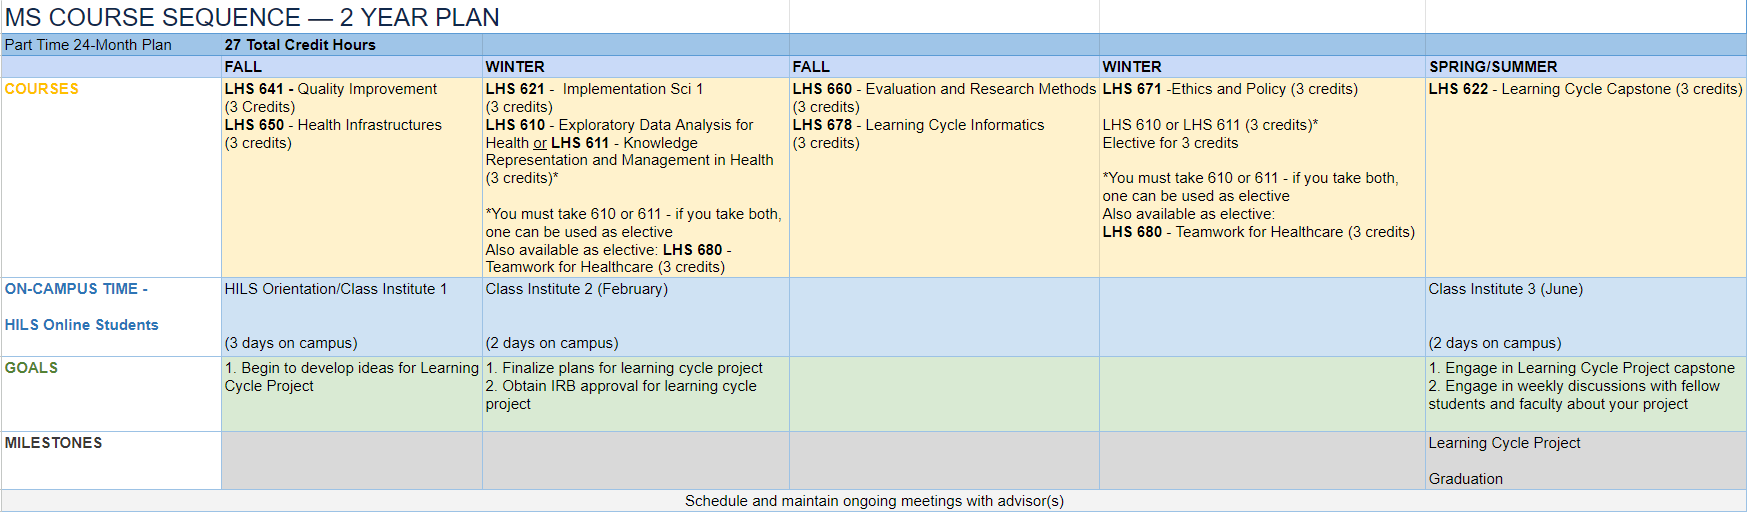 HILS MS Course Sequence on the 2-year plan